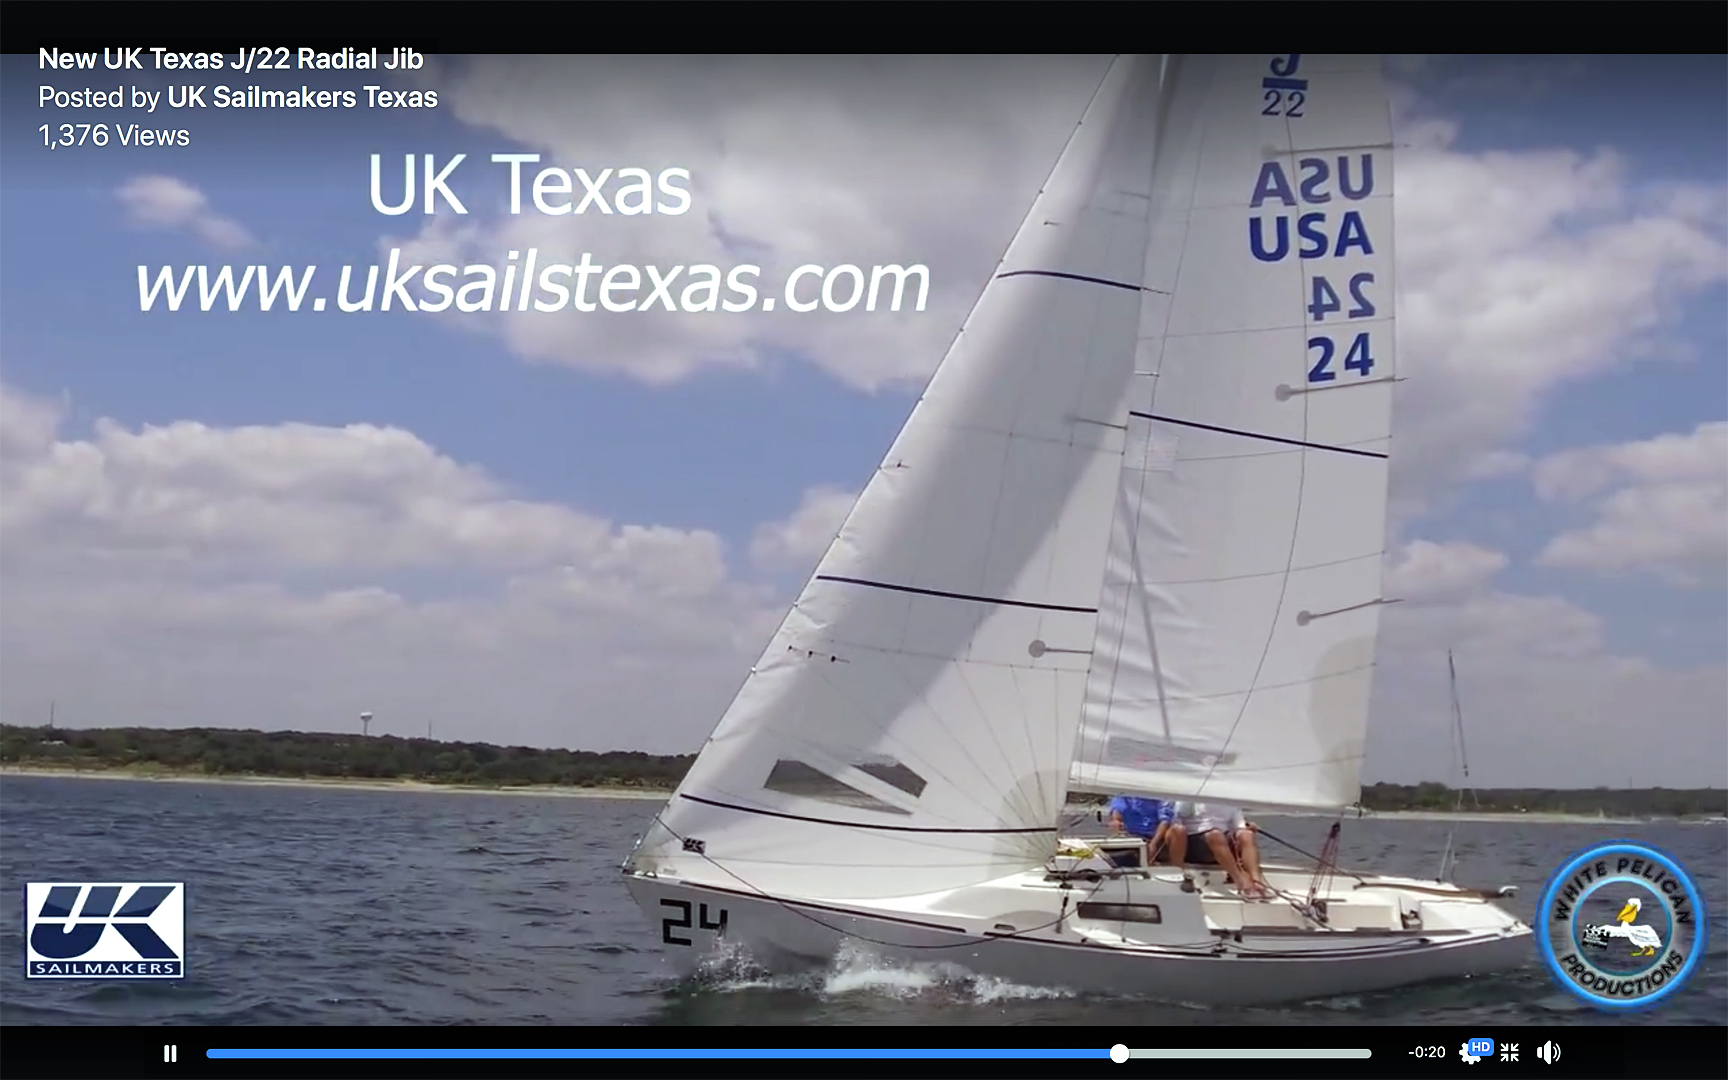 Click the image above to see a video about our latest J/22 sails designs.